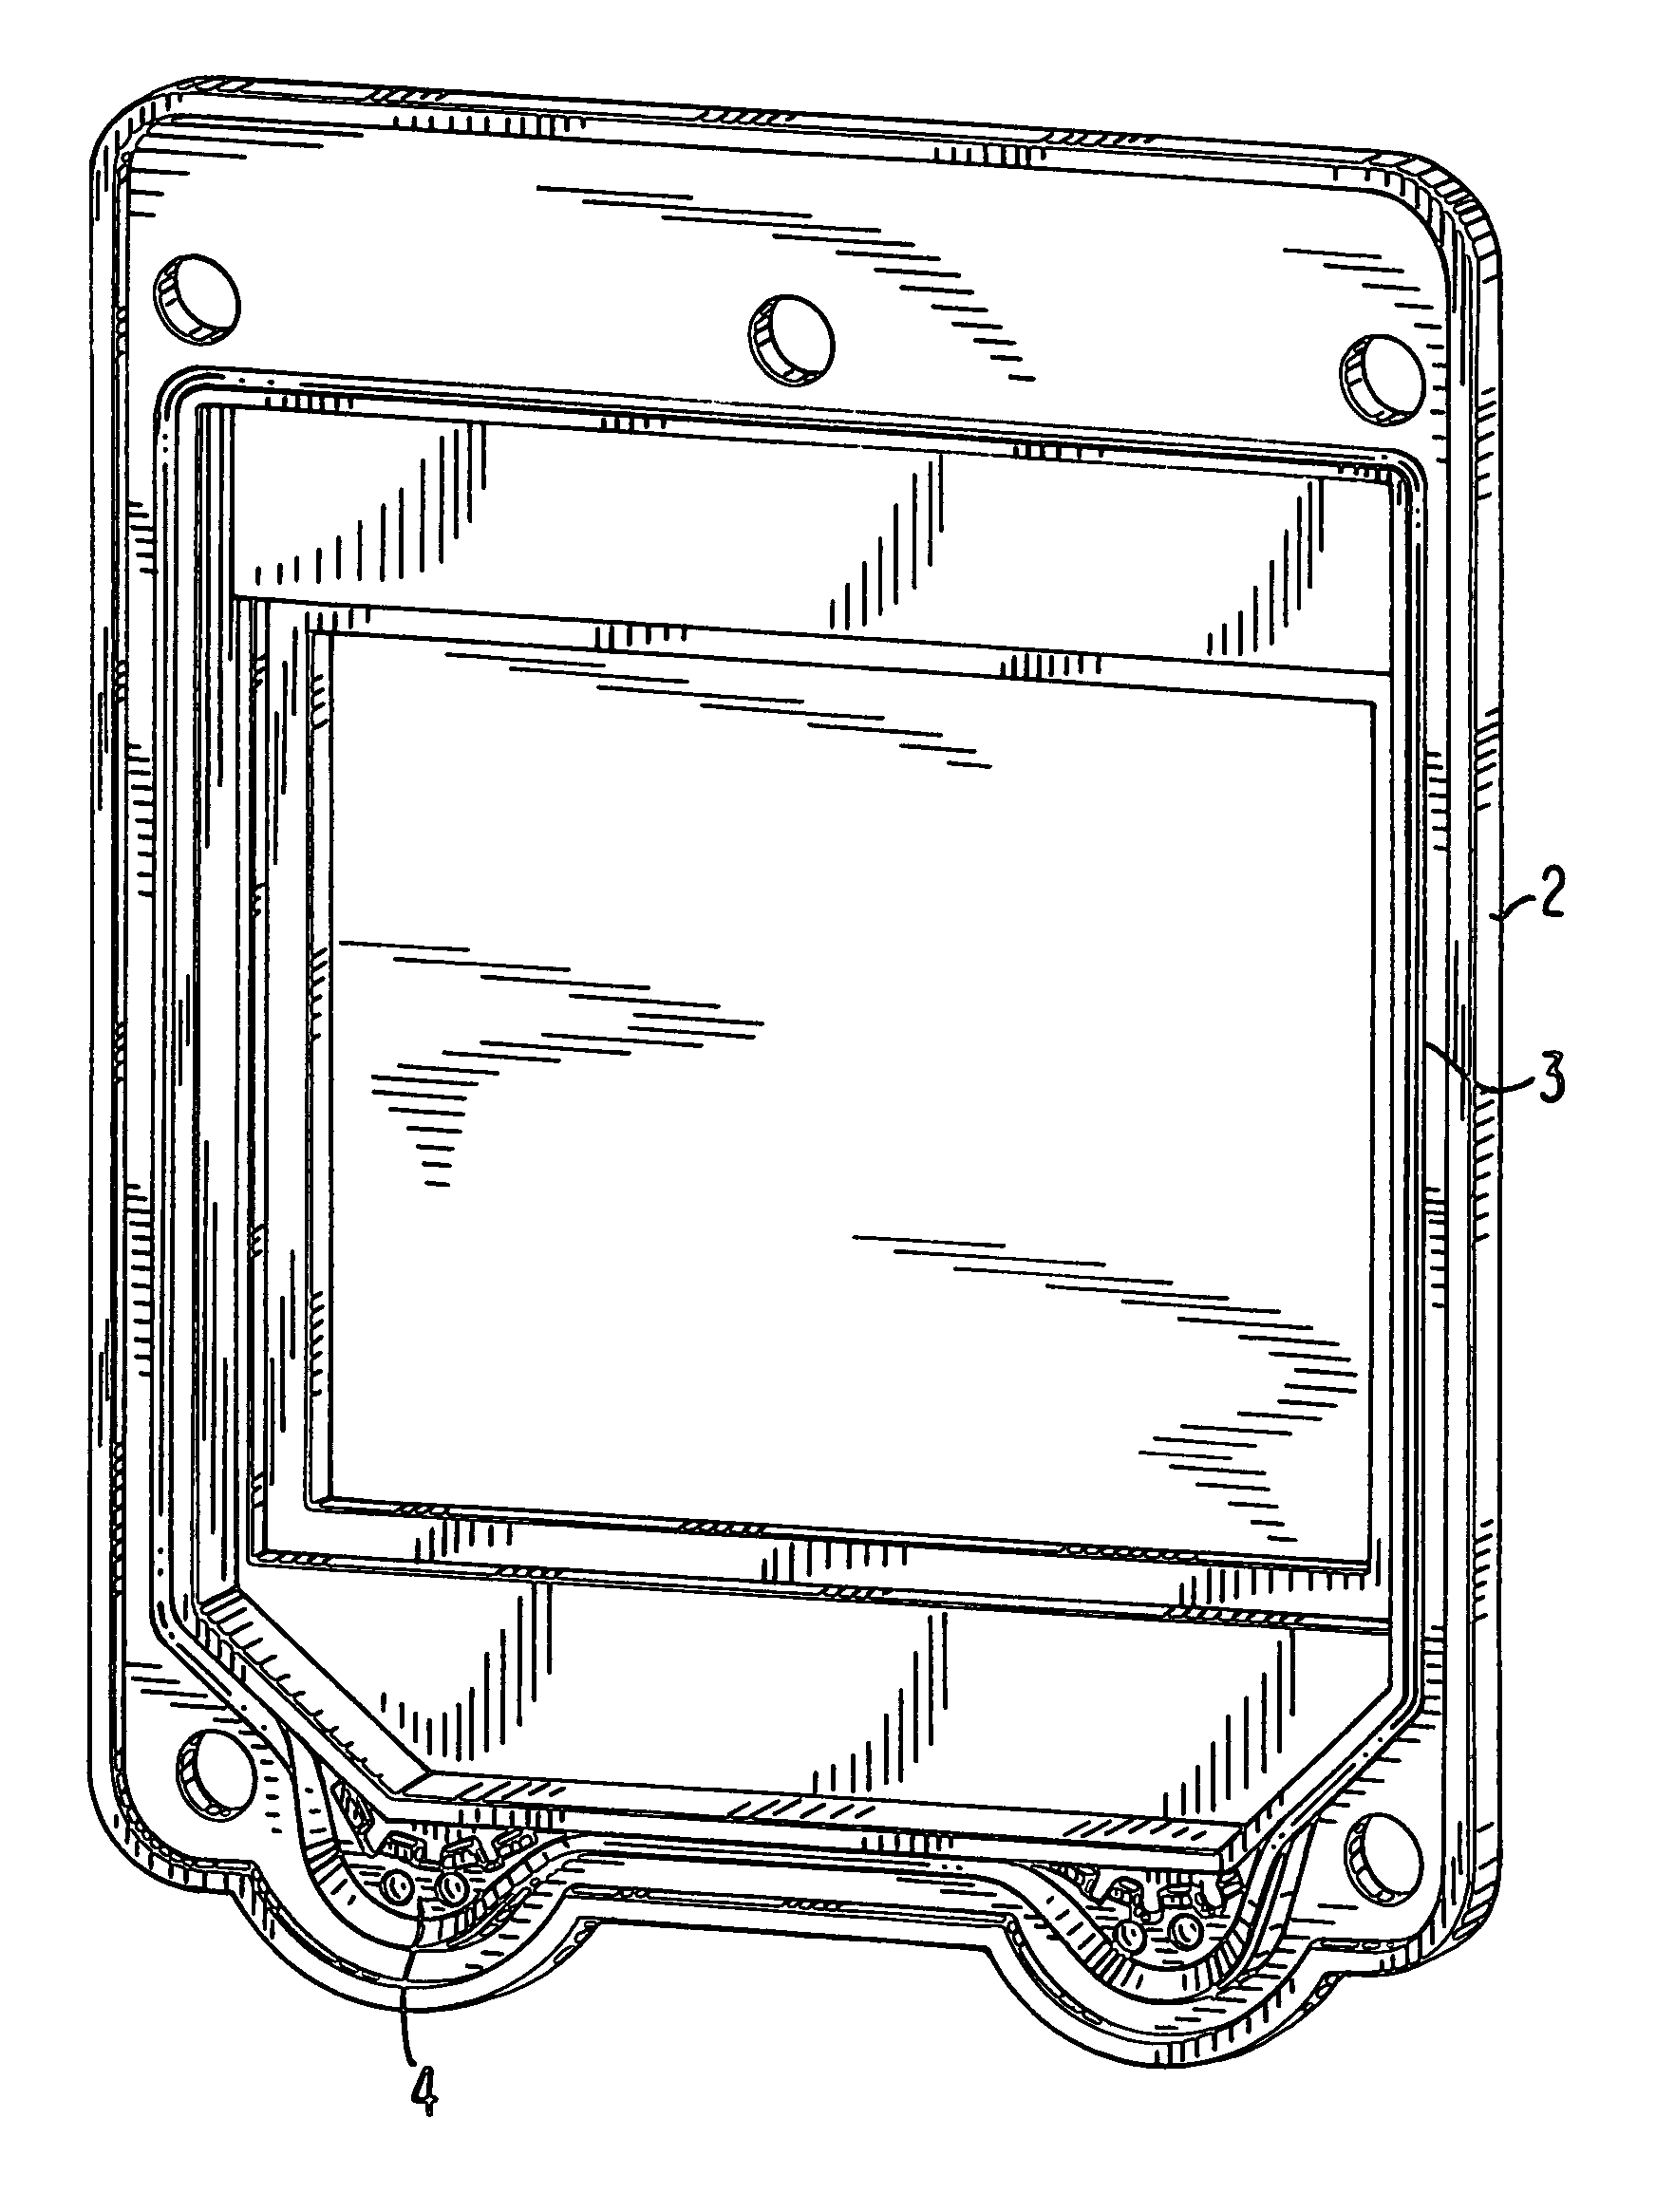 Housing for an electronic or mechtronic unit including seal with pressure relief device